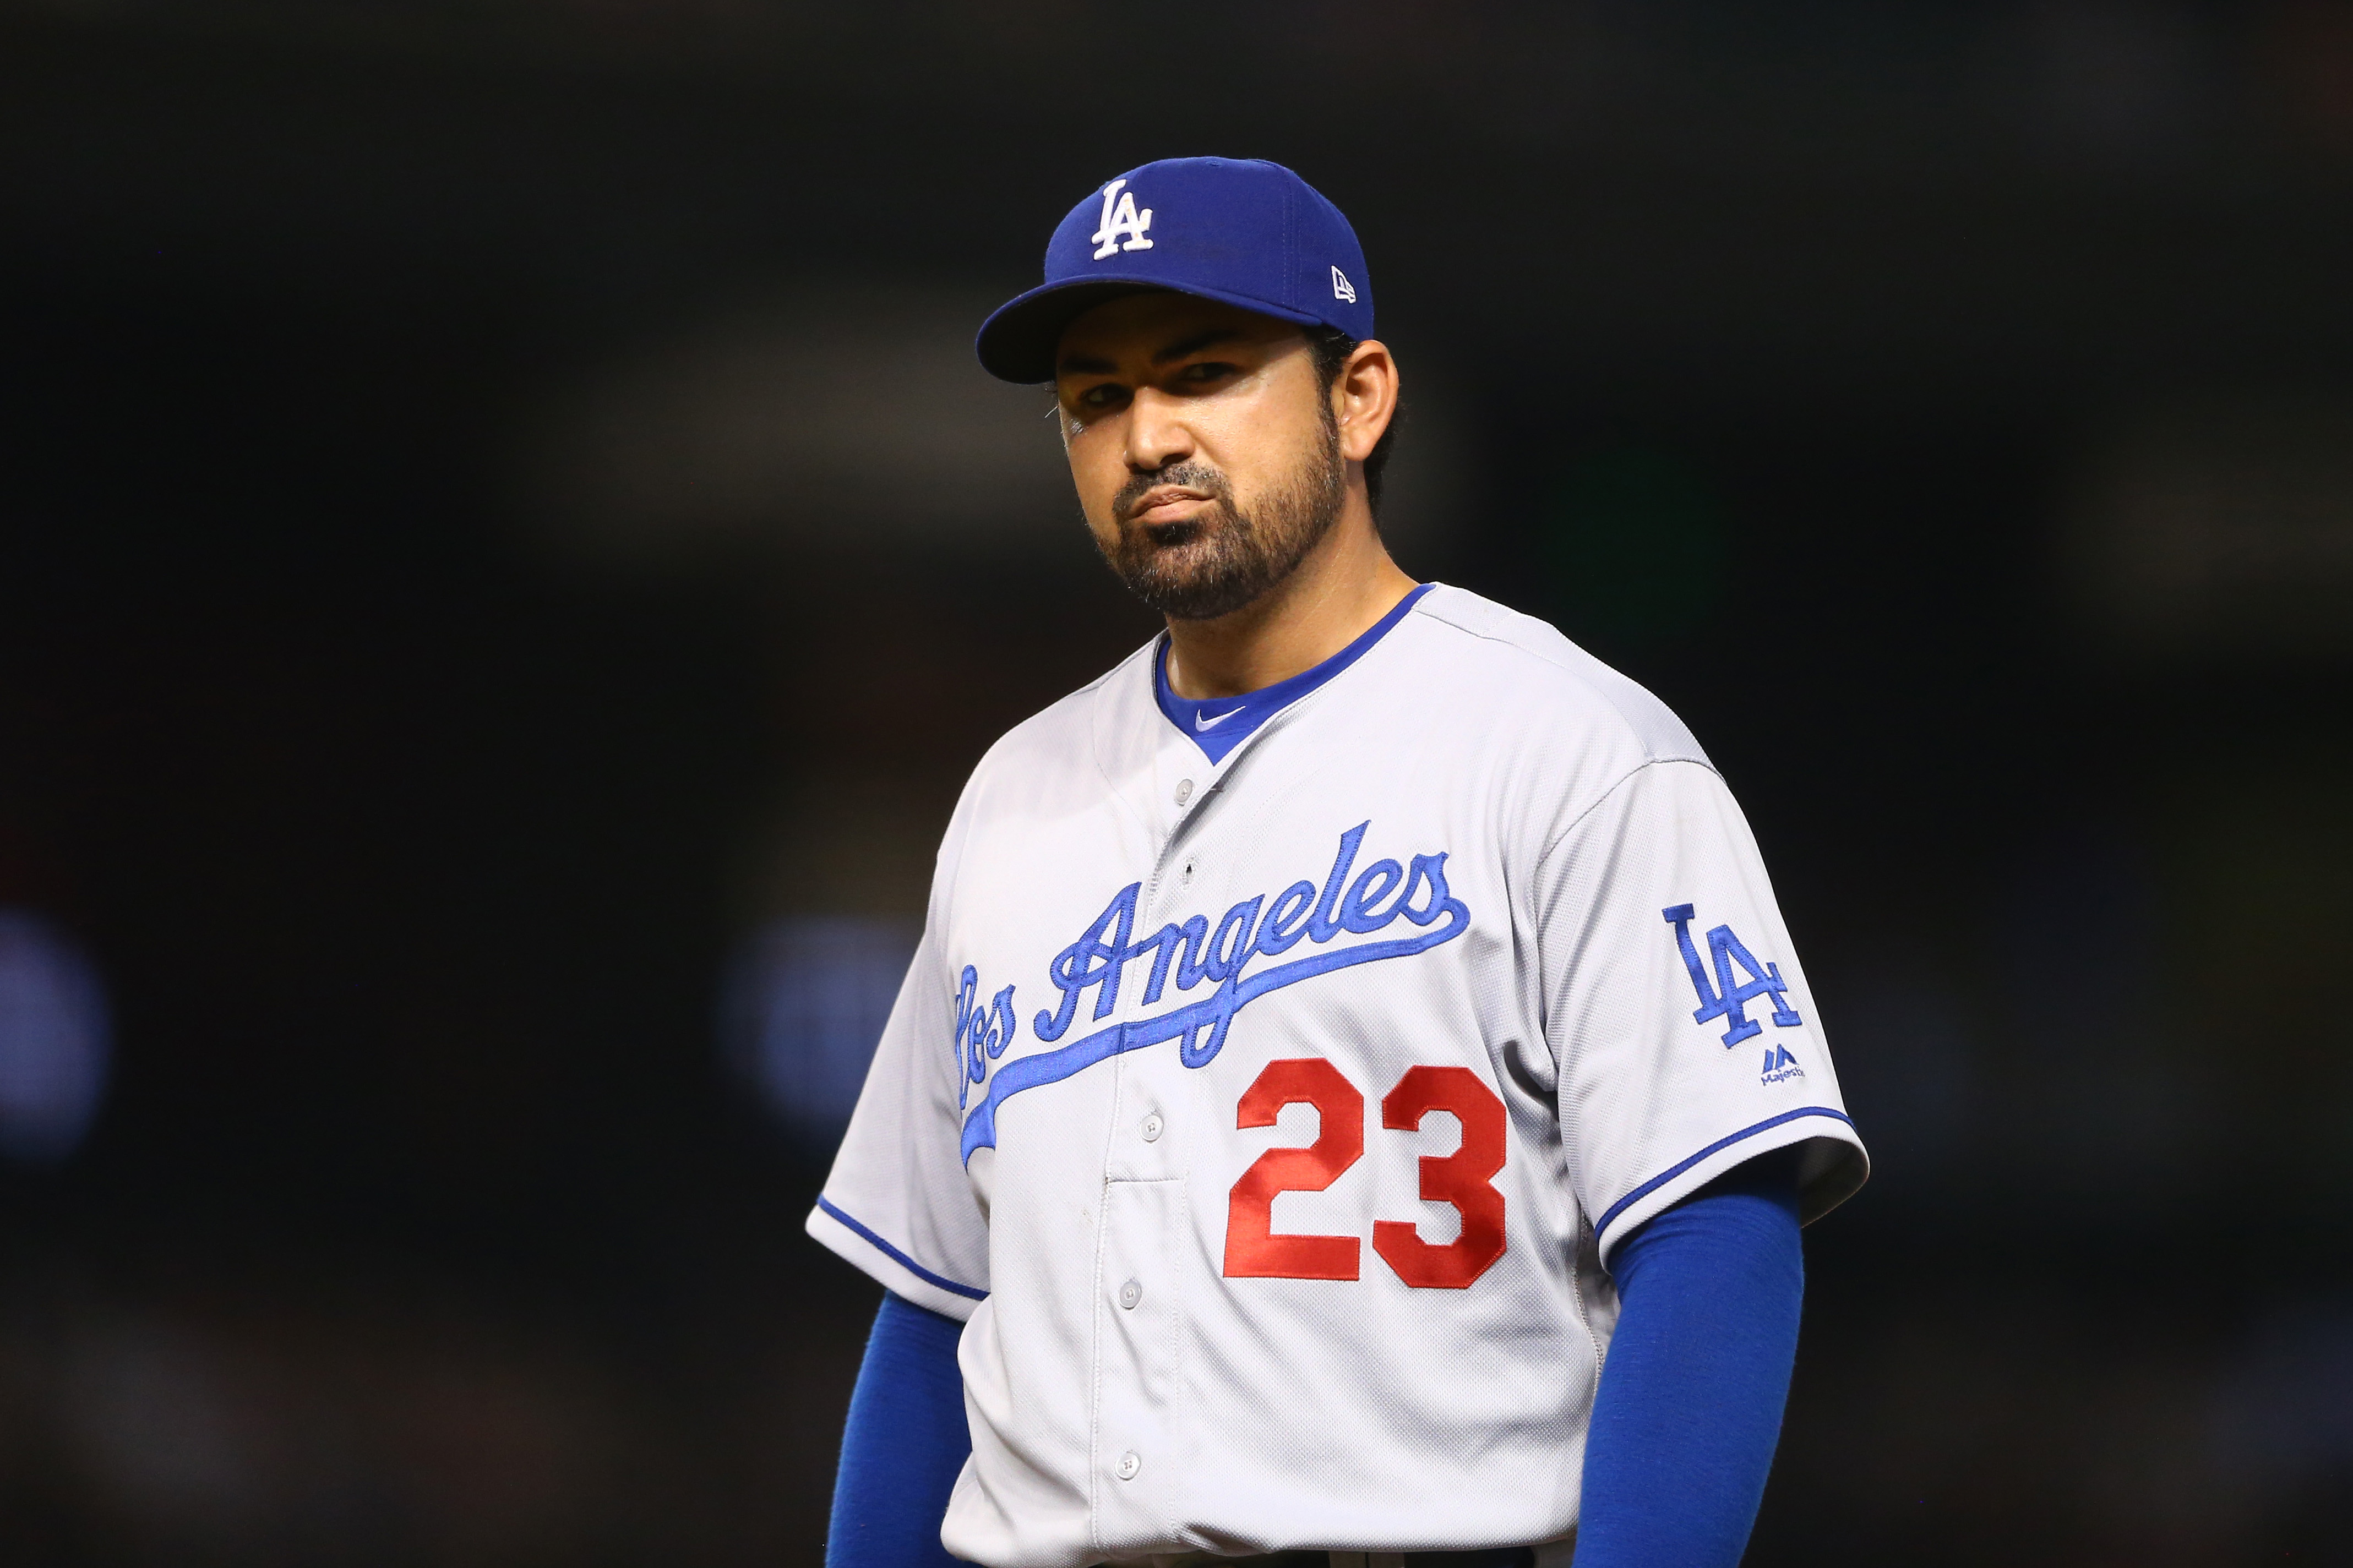 Adrian Gonzalez First Baseman for the Los Angeles Dodgers